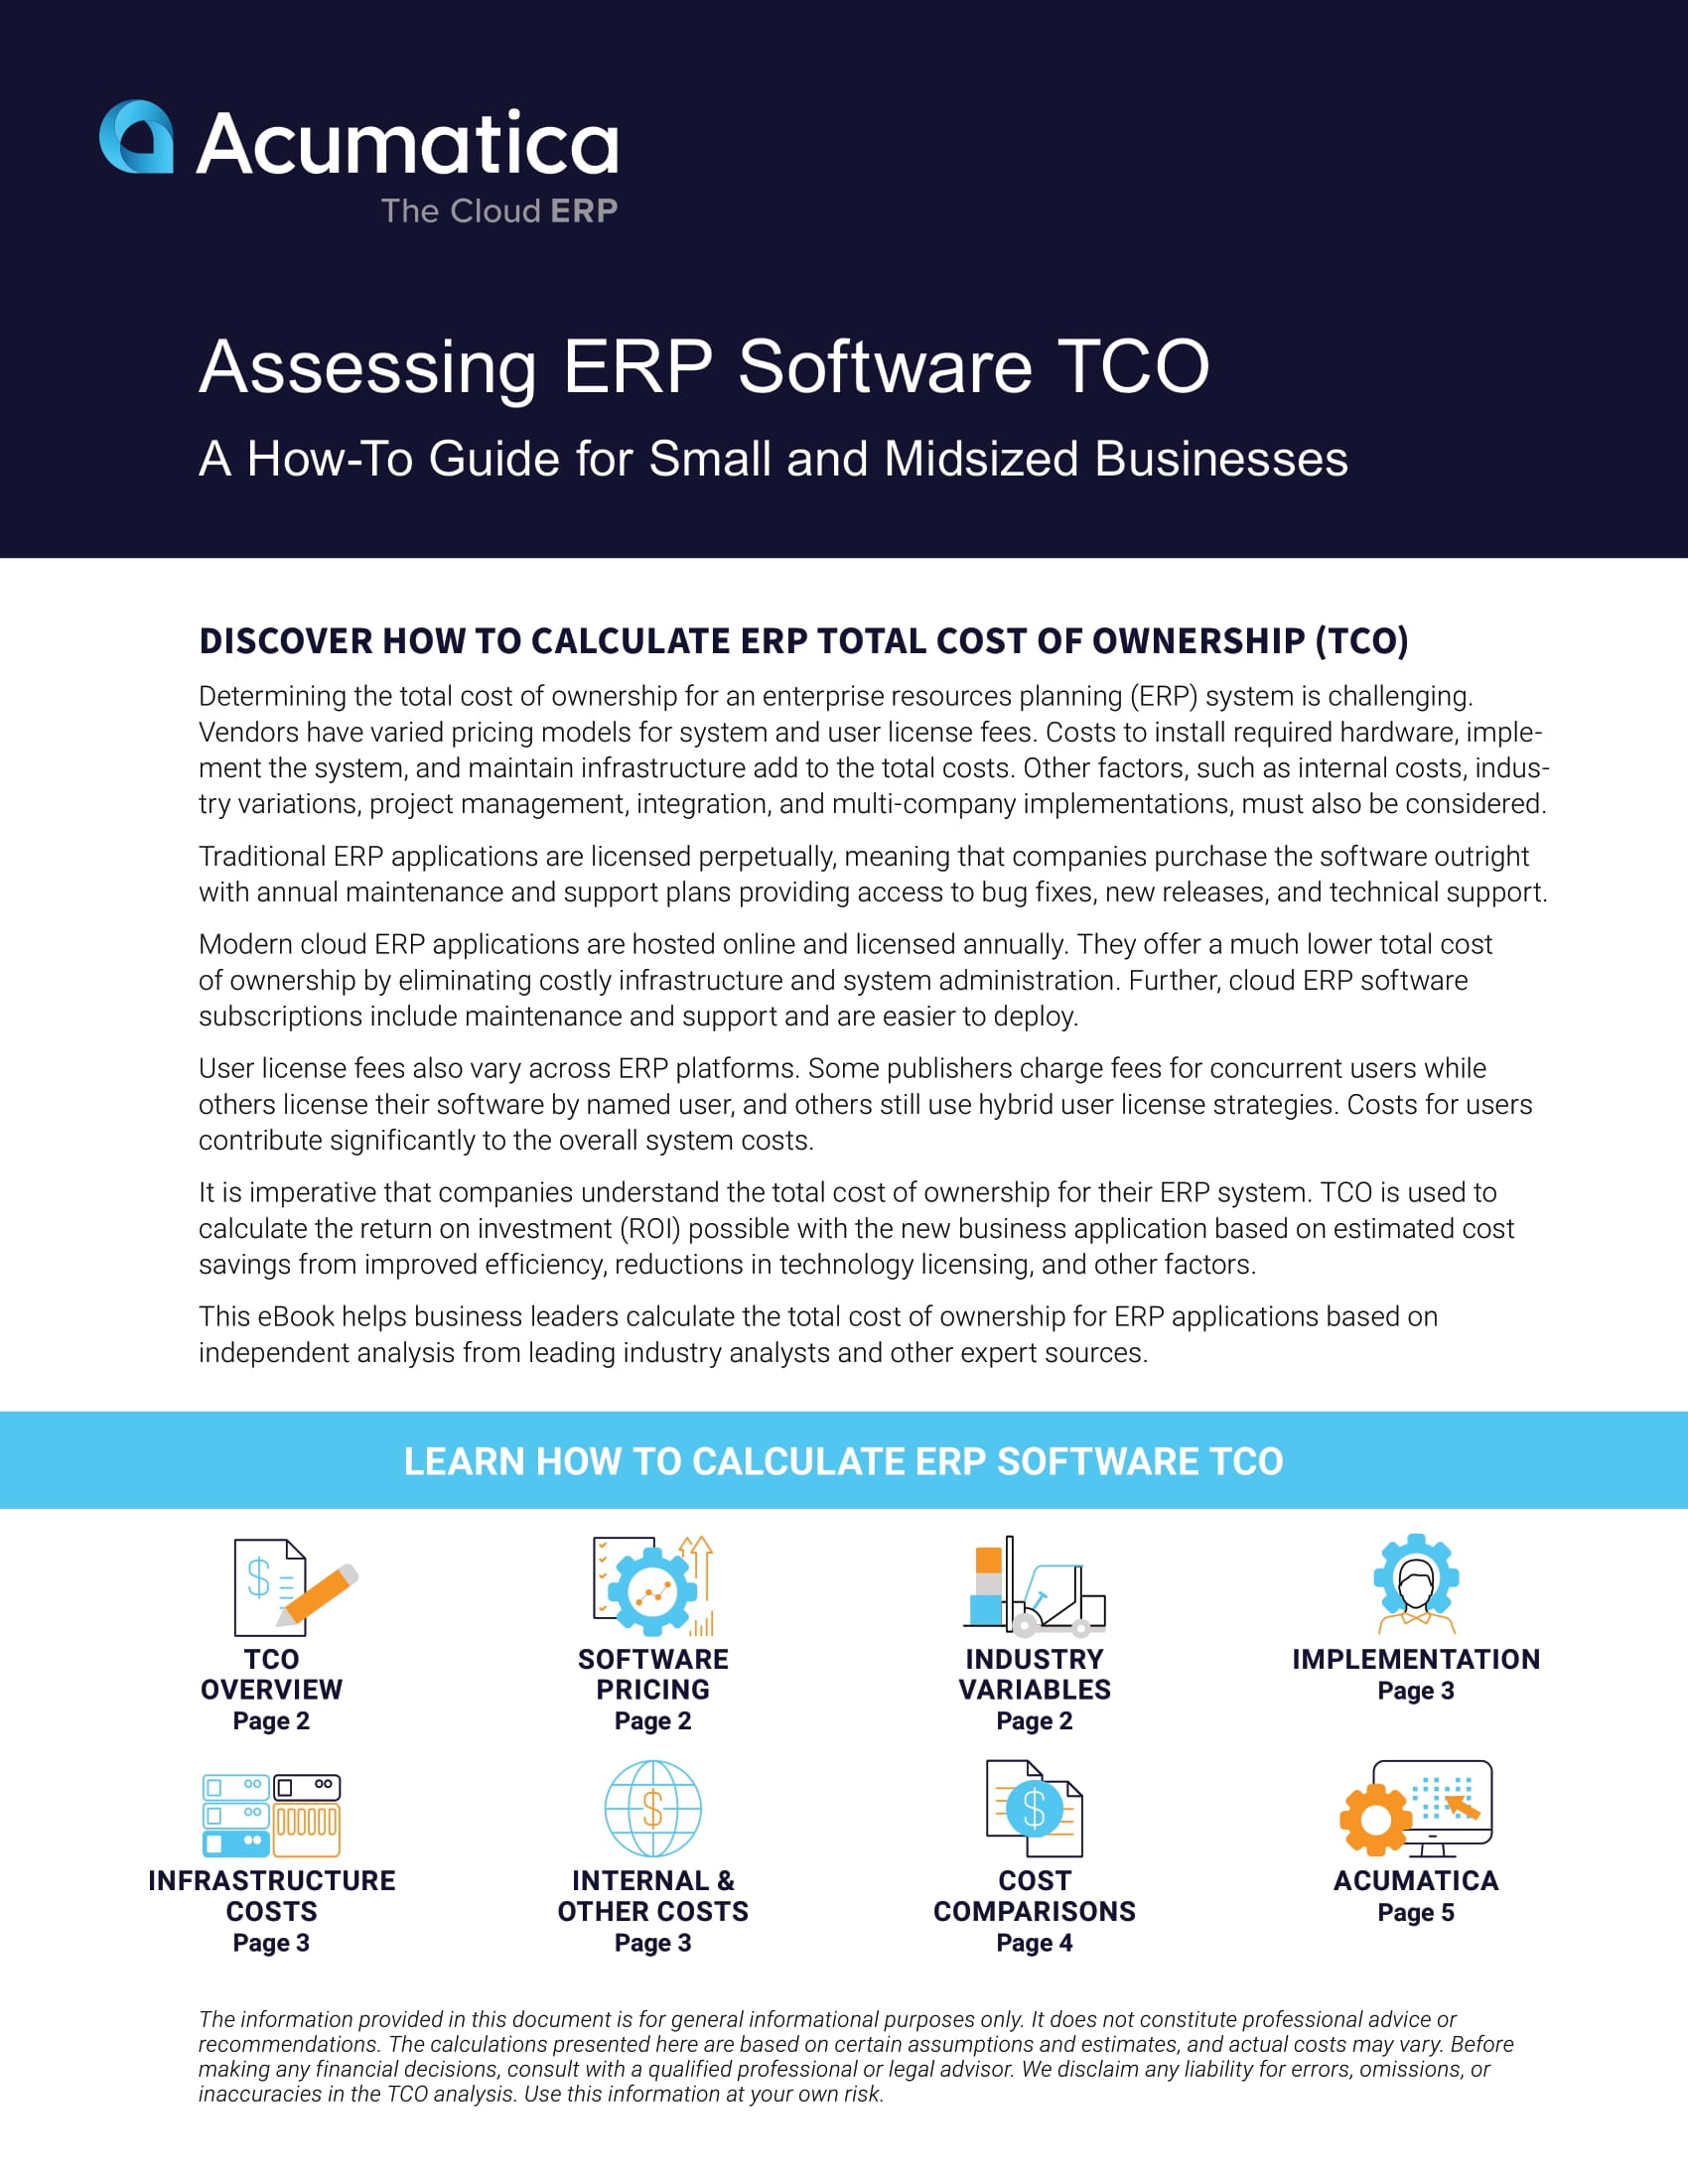 How to Assess ERP Software Total Cost of Ownership (TCO)